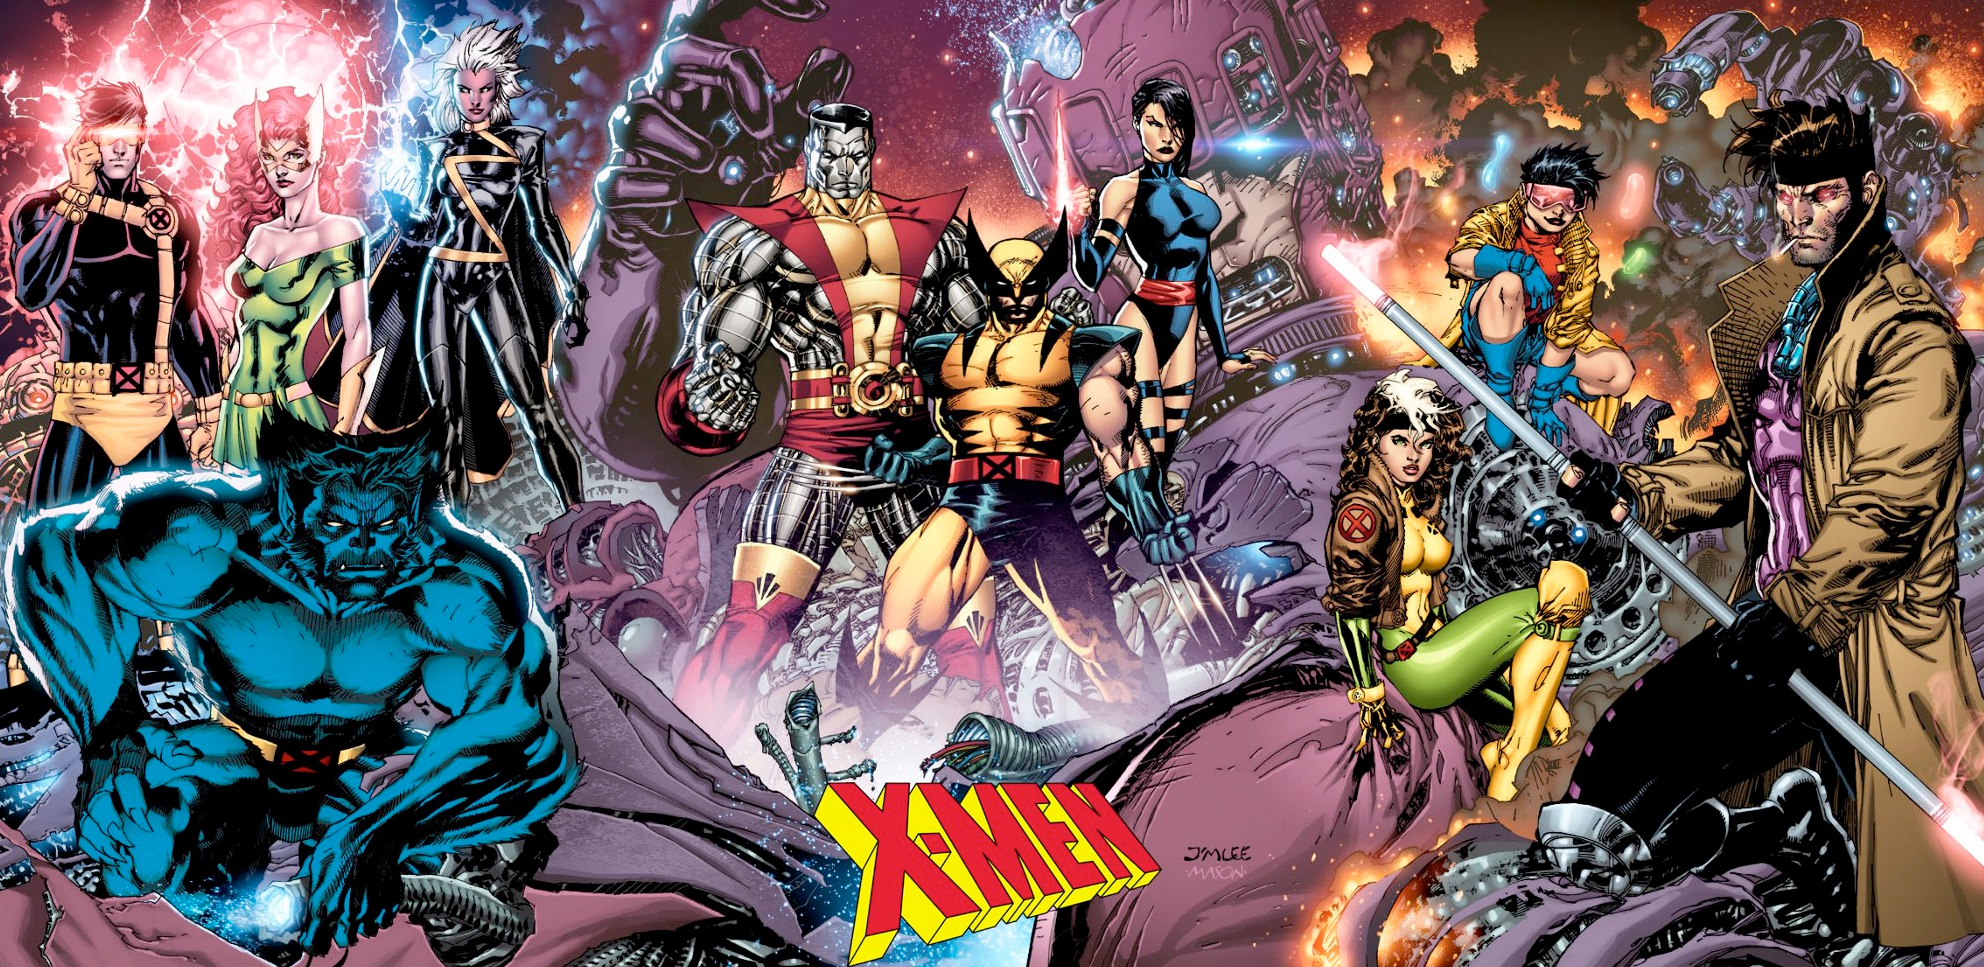 The X-Men Movie Rights Are Being Blamed For Poor X-Men Comics Sales